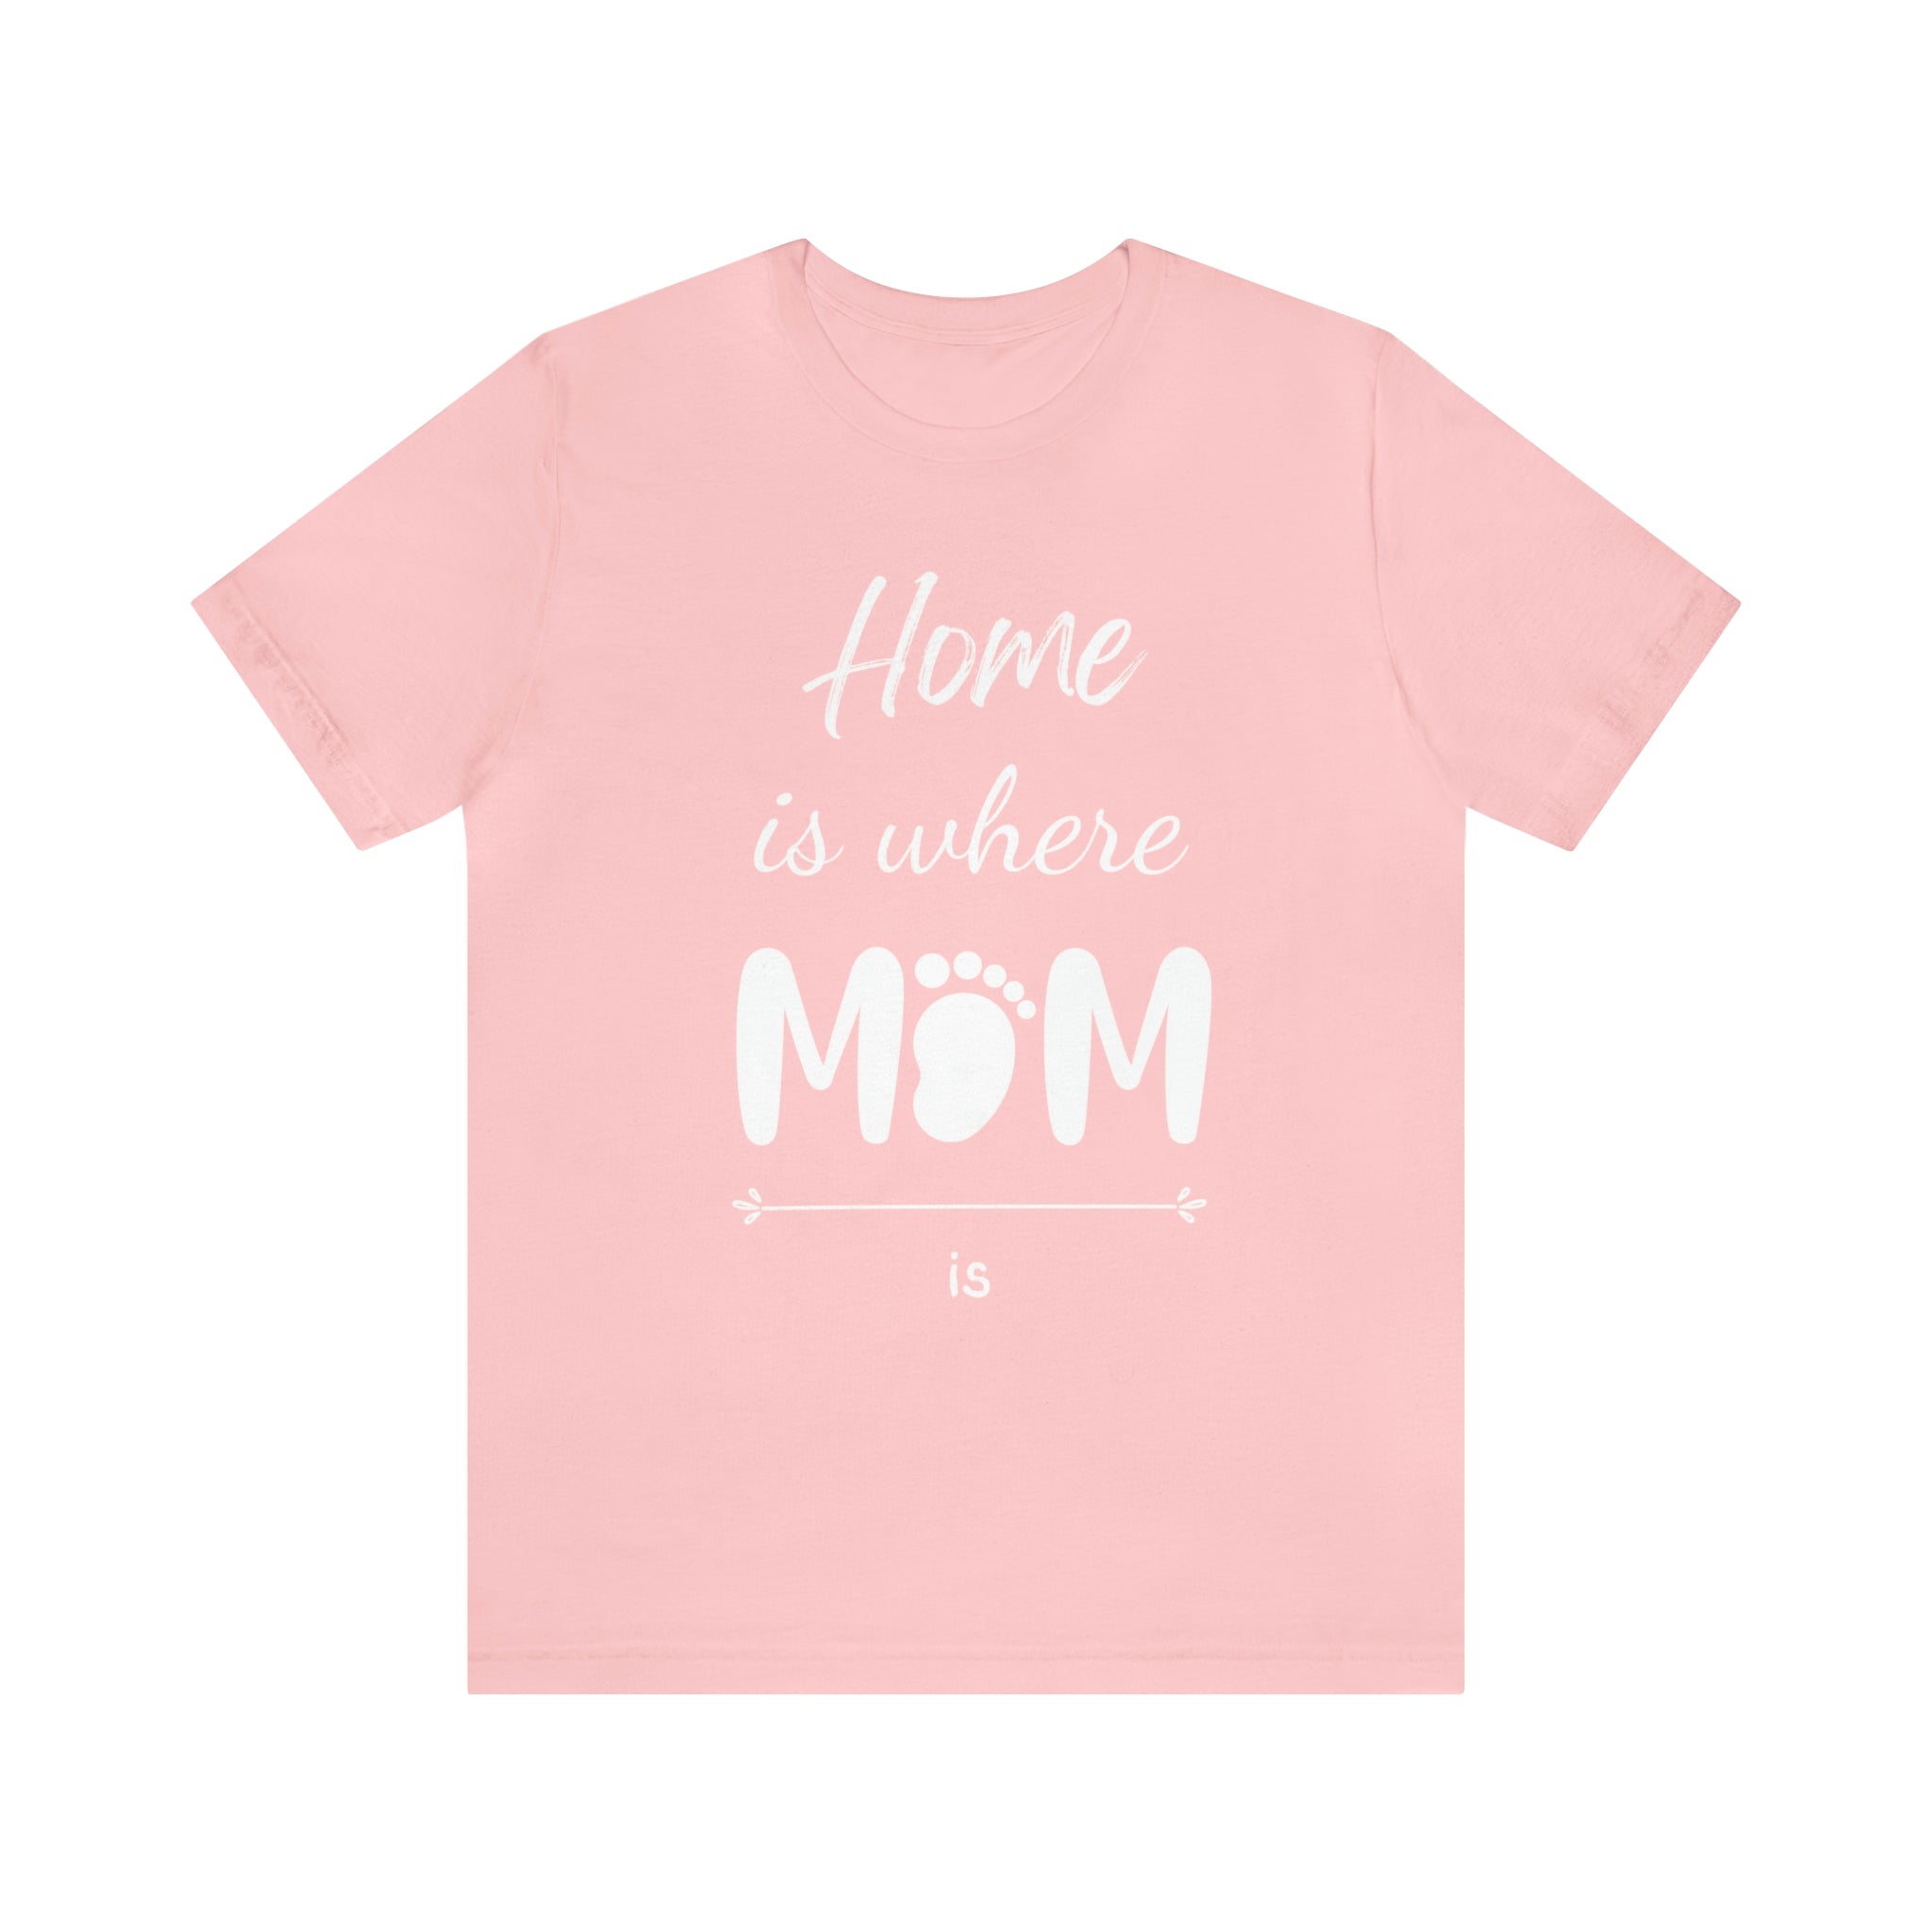 Home Is Where Mom Is Women T-shirt